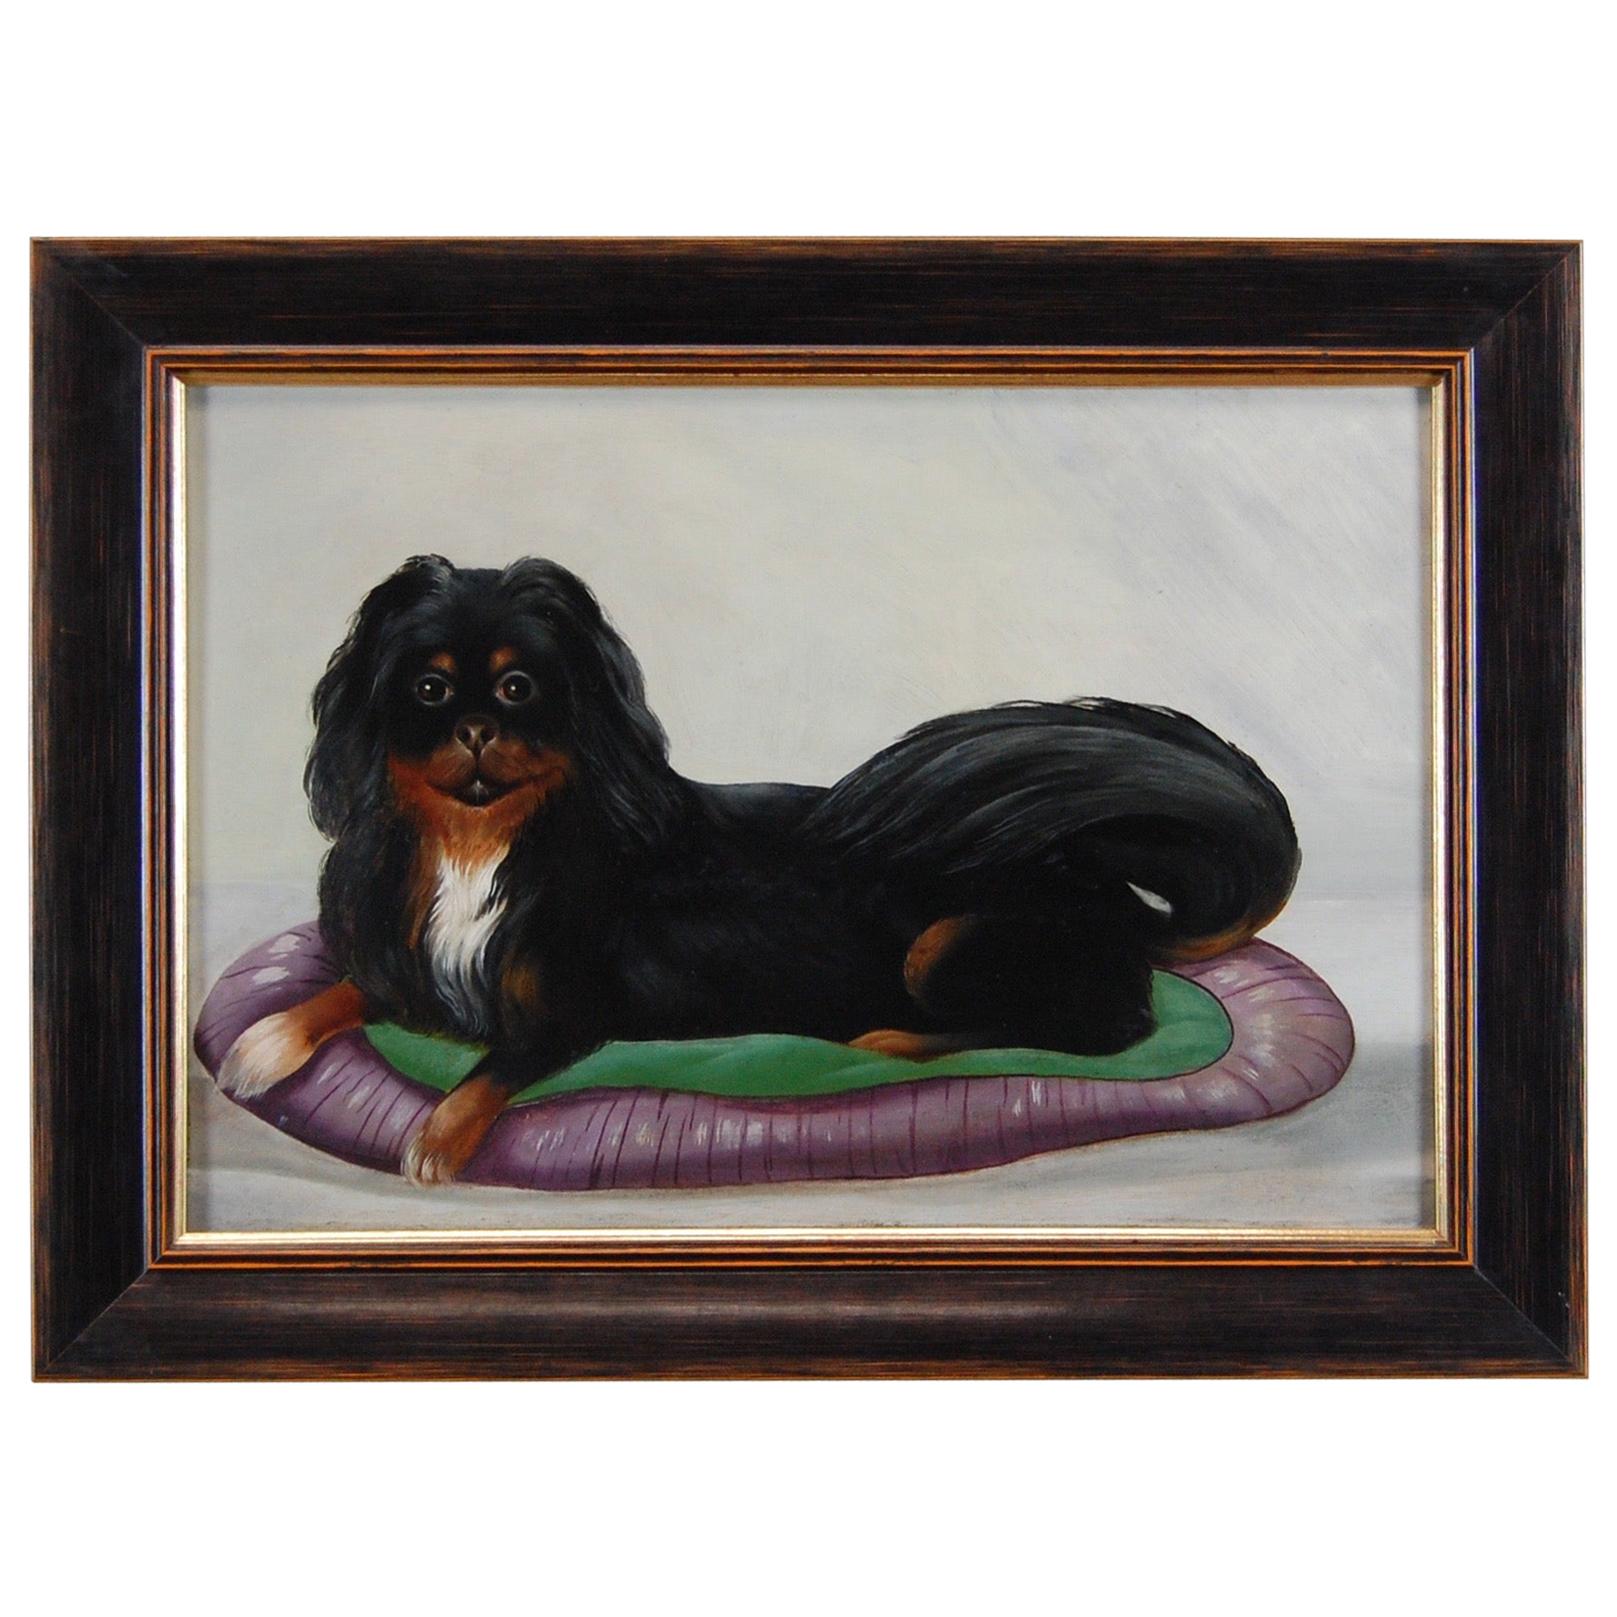 Early 20th Century Naive Oil Painting on Board, Reclining Spaniel on a Cushion